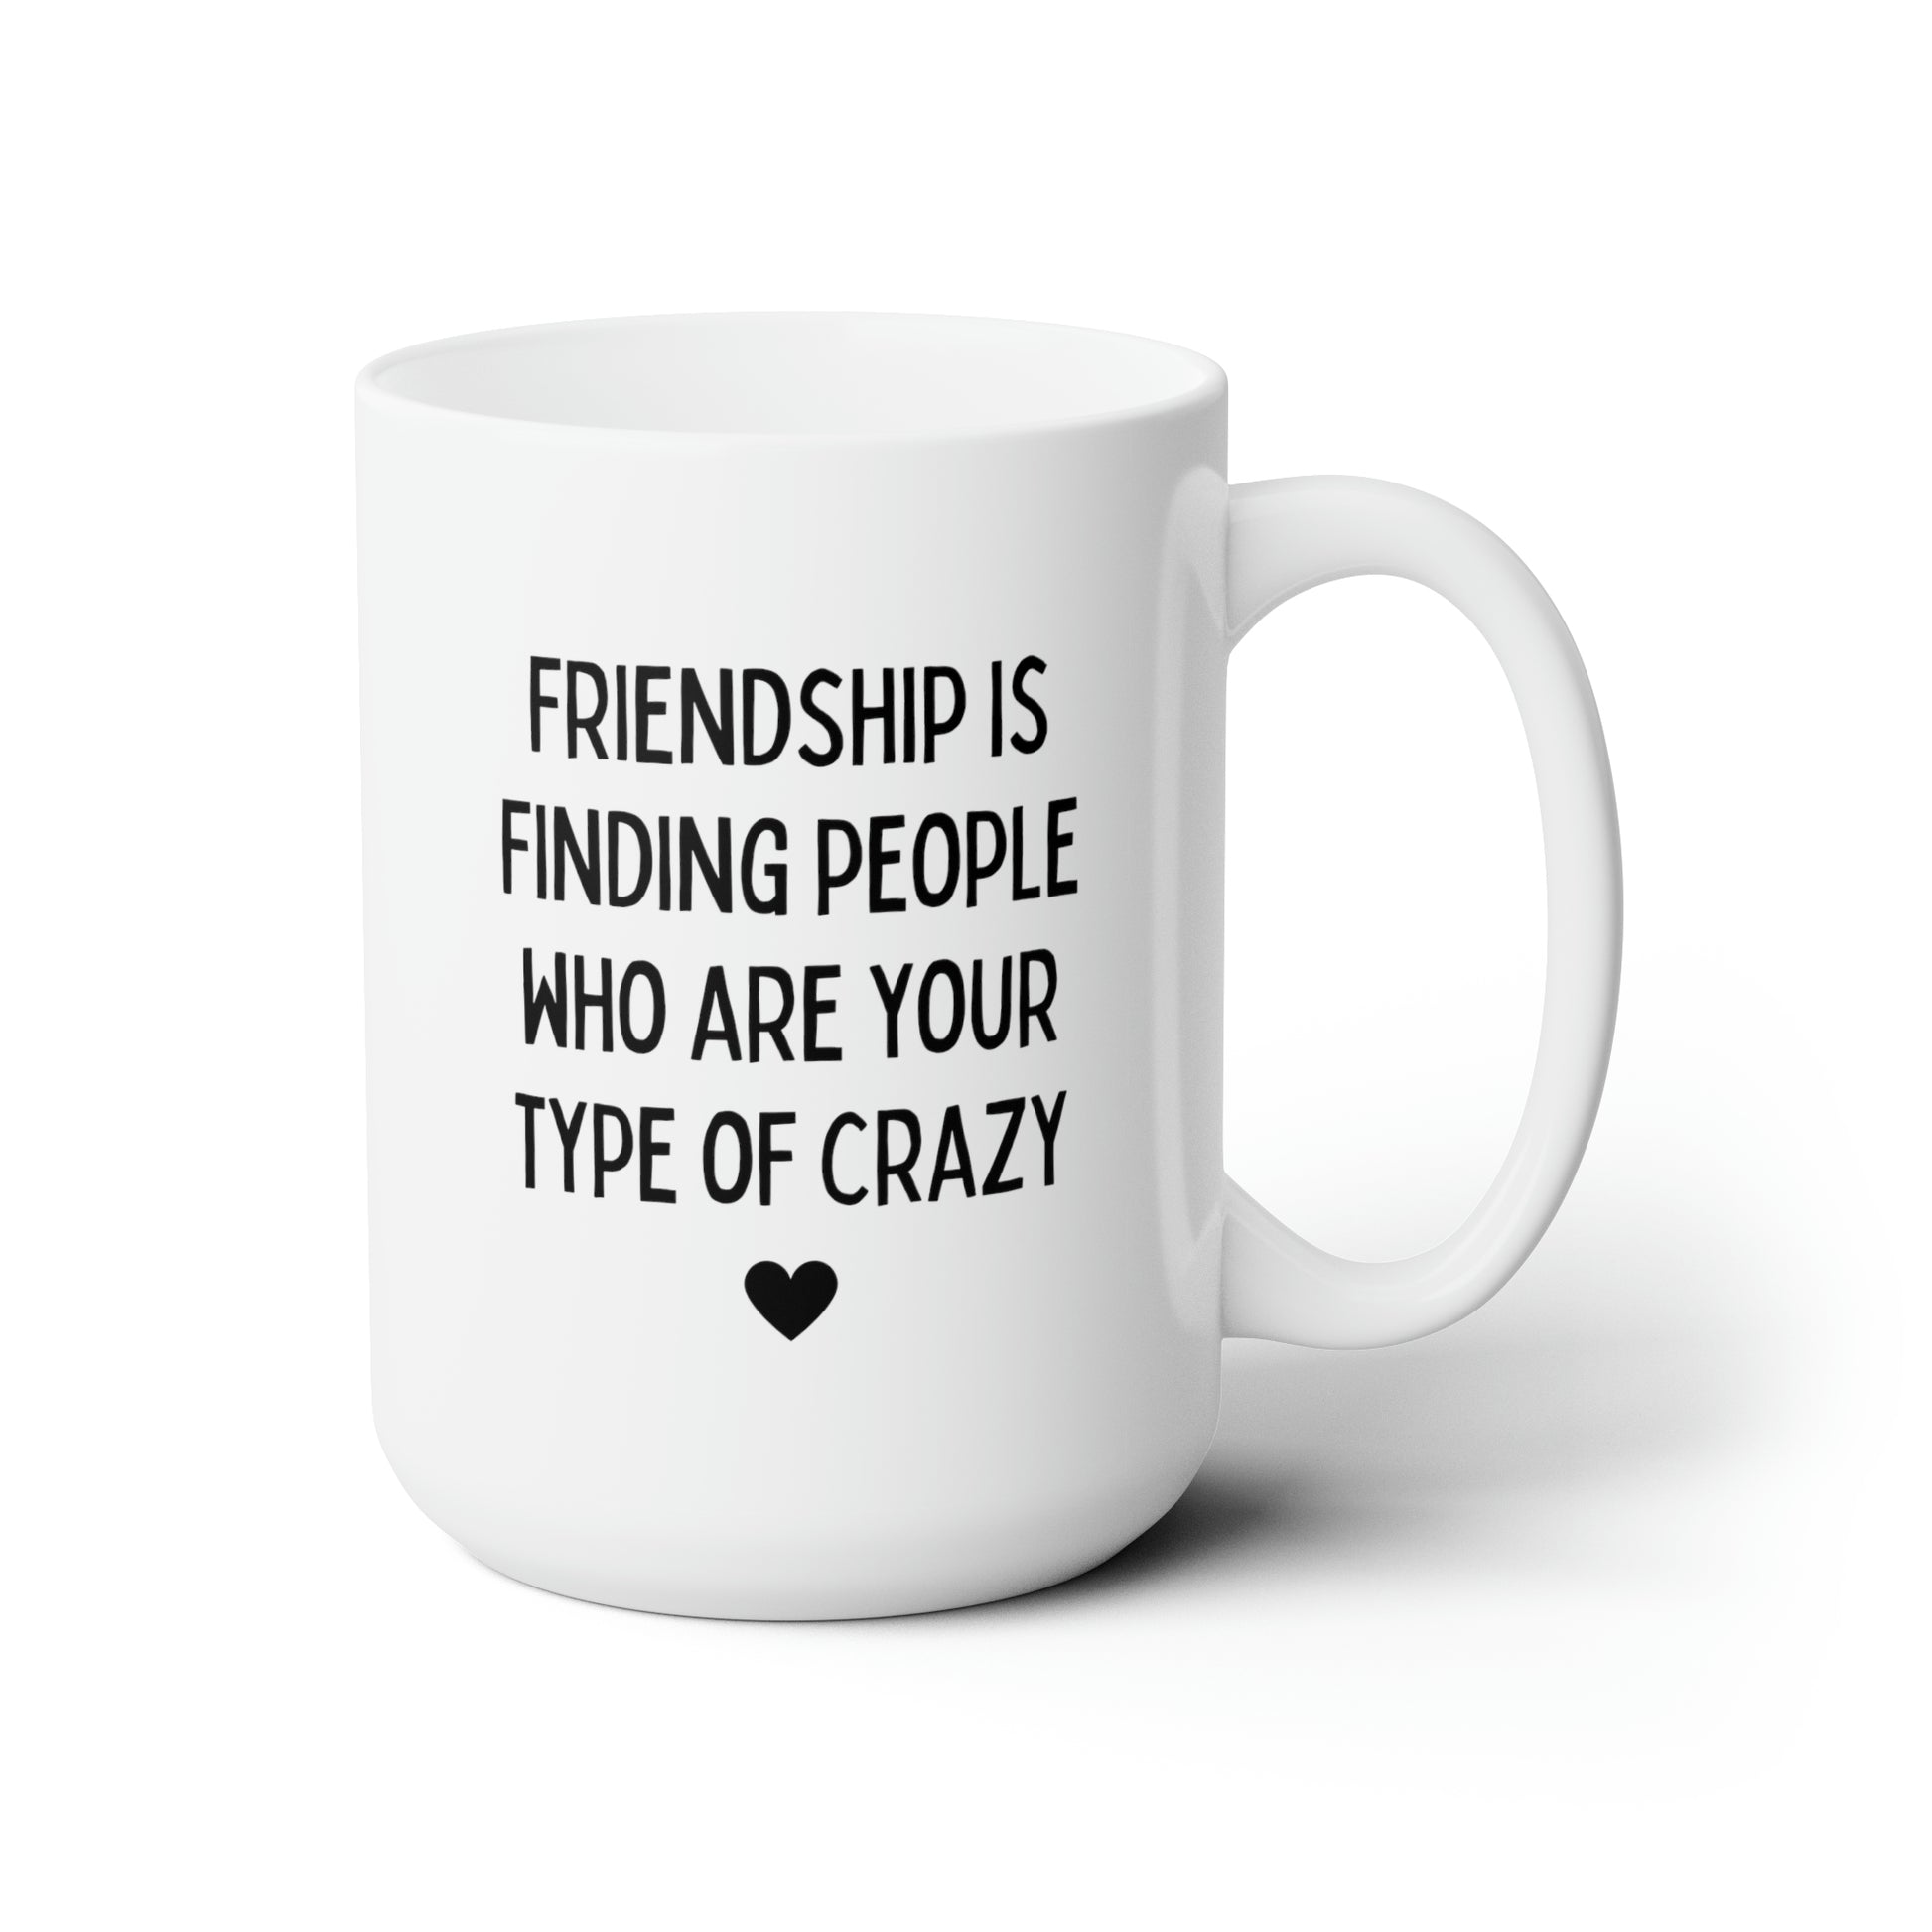 Friendship Is Finding People Who Are Your Type Of Crazy 15oz white funny large coffee mug gift for best friend friendship decor BFF Bestie tea cup waveywares wavey wares wavywares wavy wares